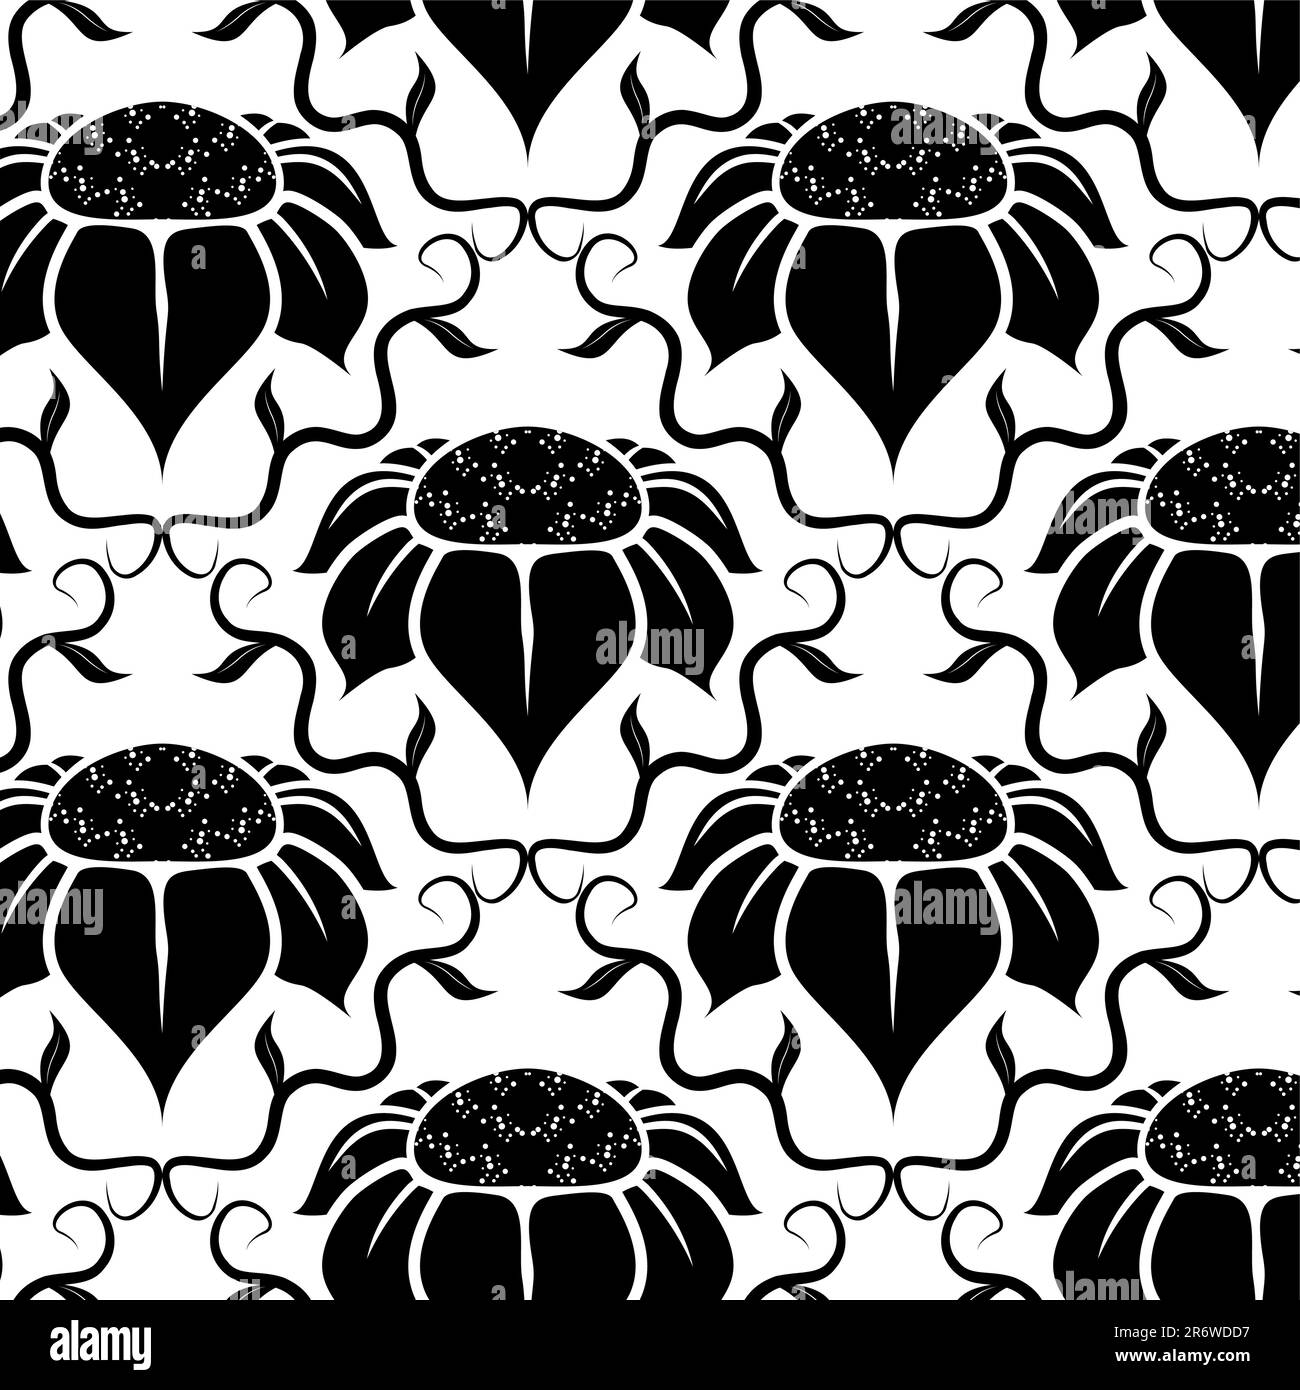 Illustration of a black and white vintage floral pattern Stock Vector